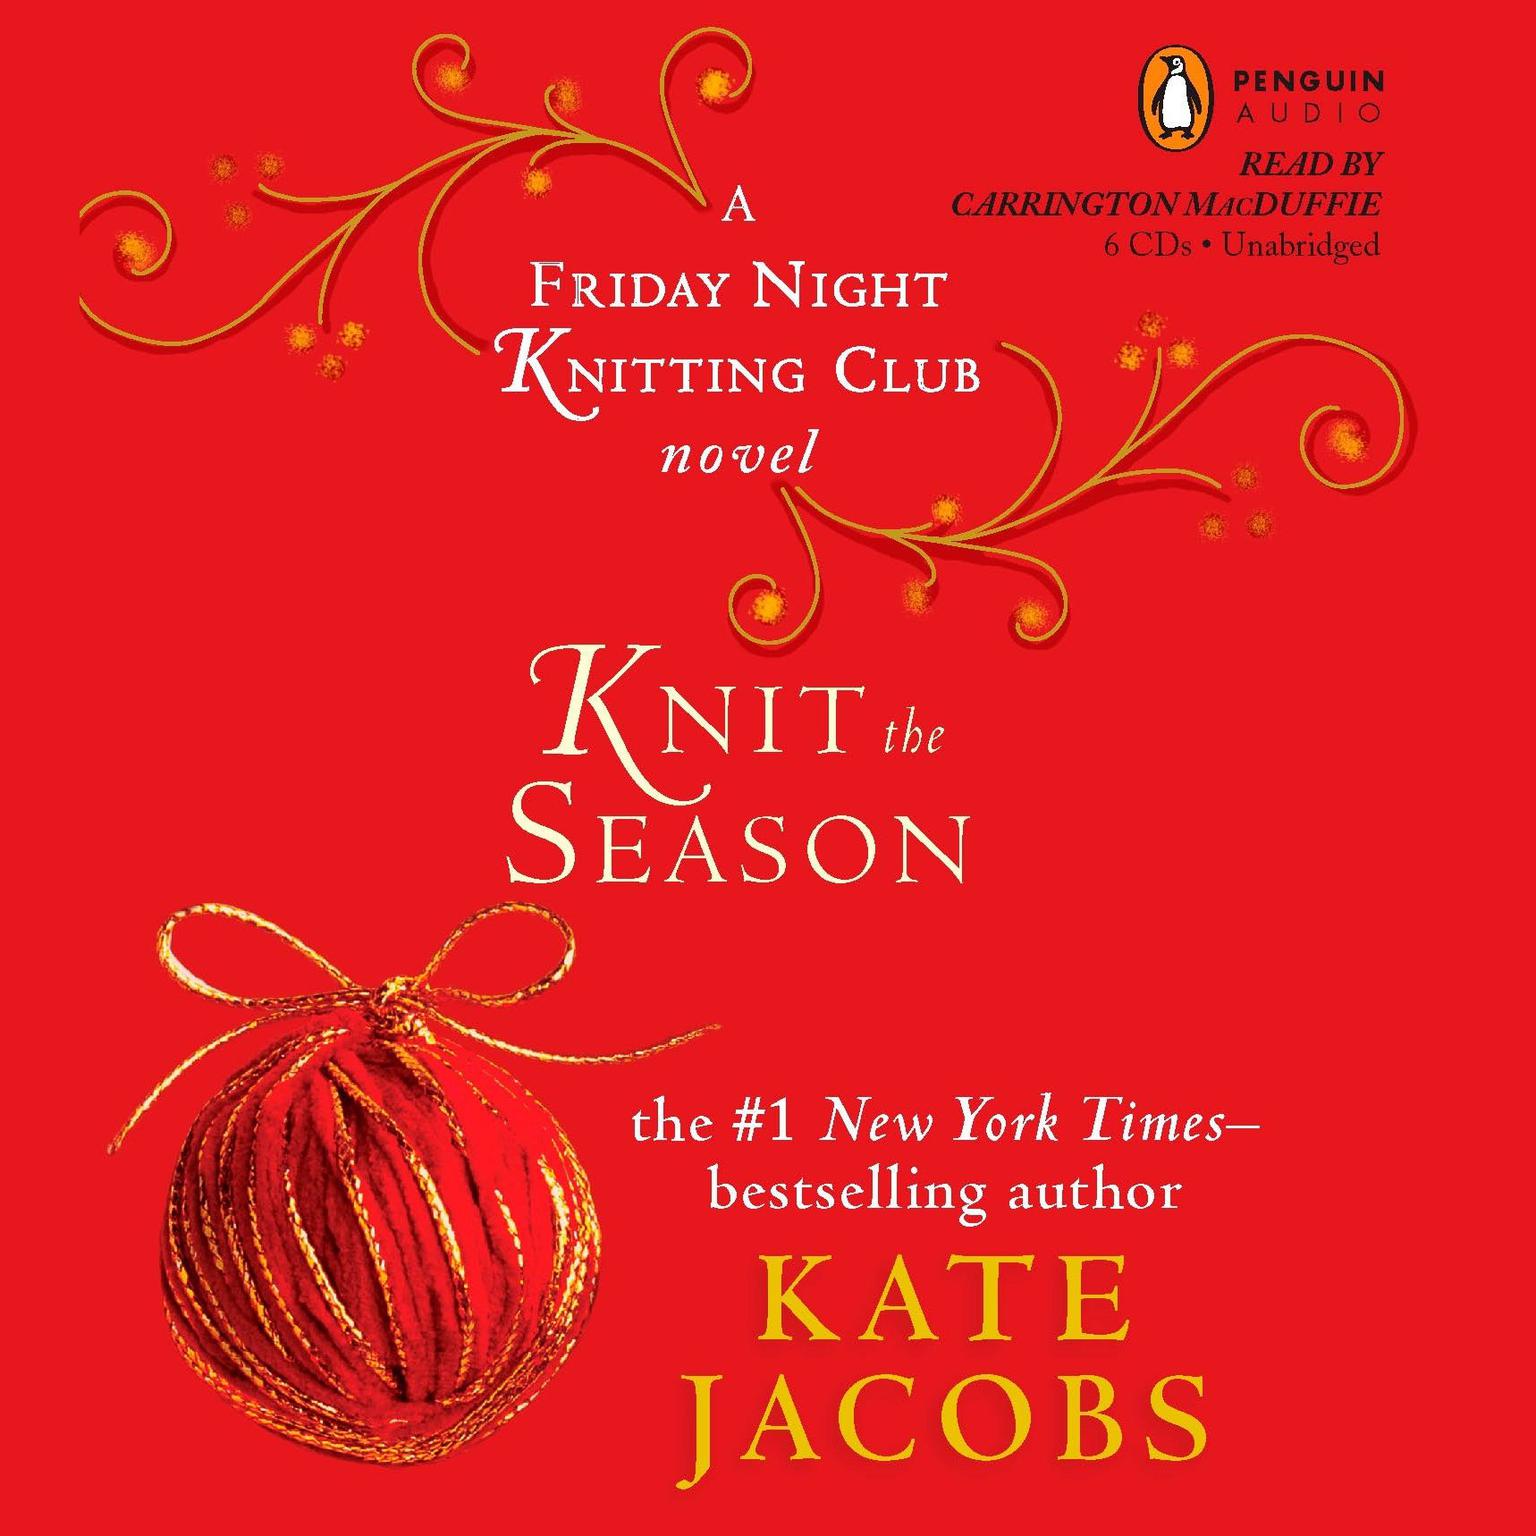 Knit the Season: A Friday Night Knitting Club Novel Audiobook, by Kate Jacobs